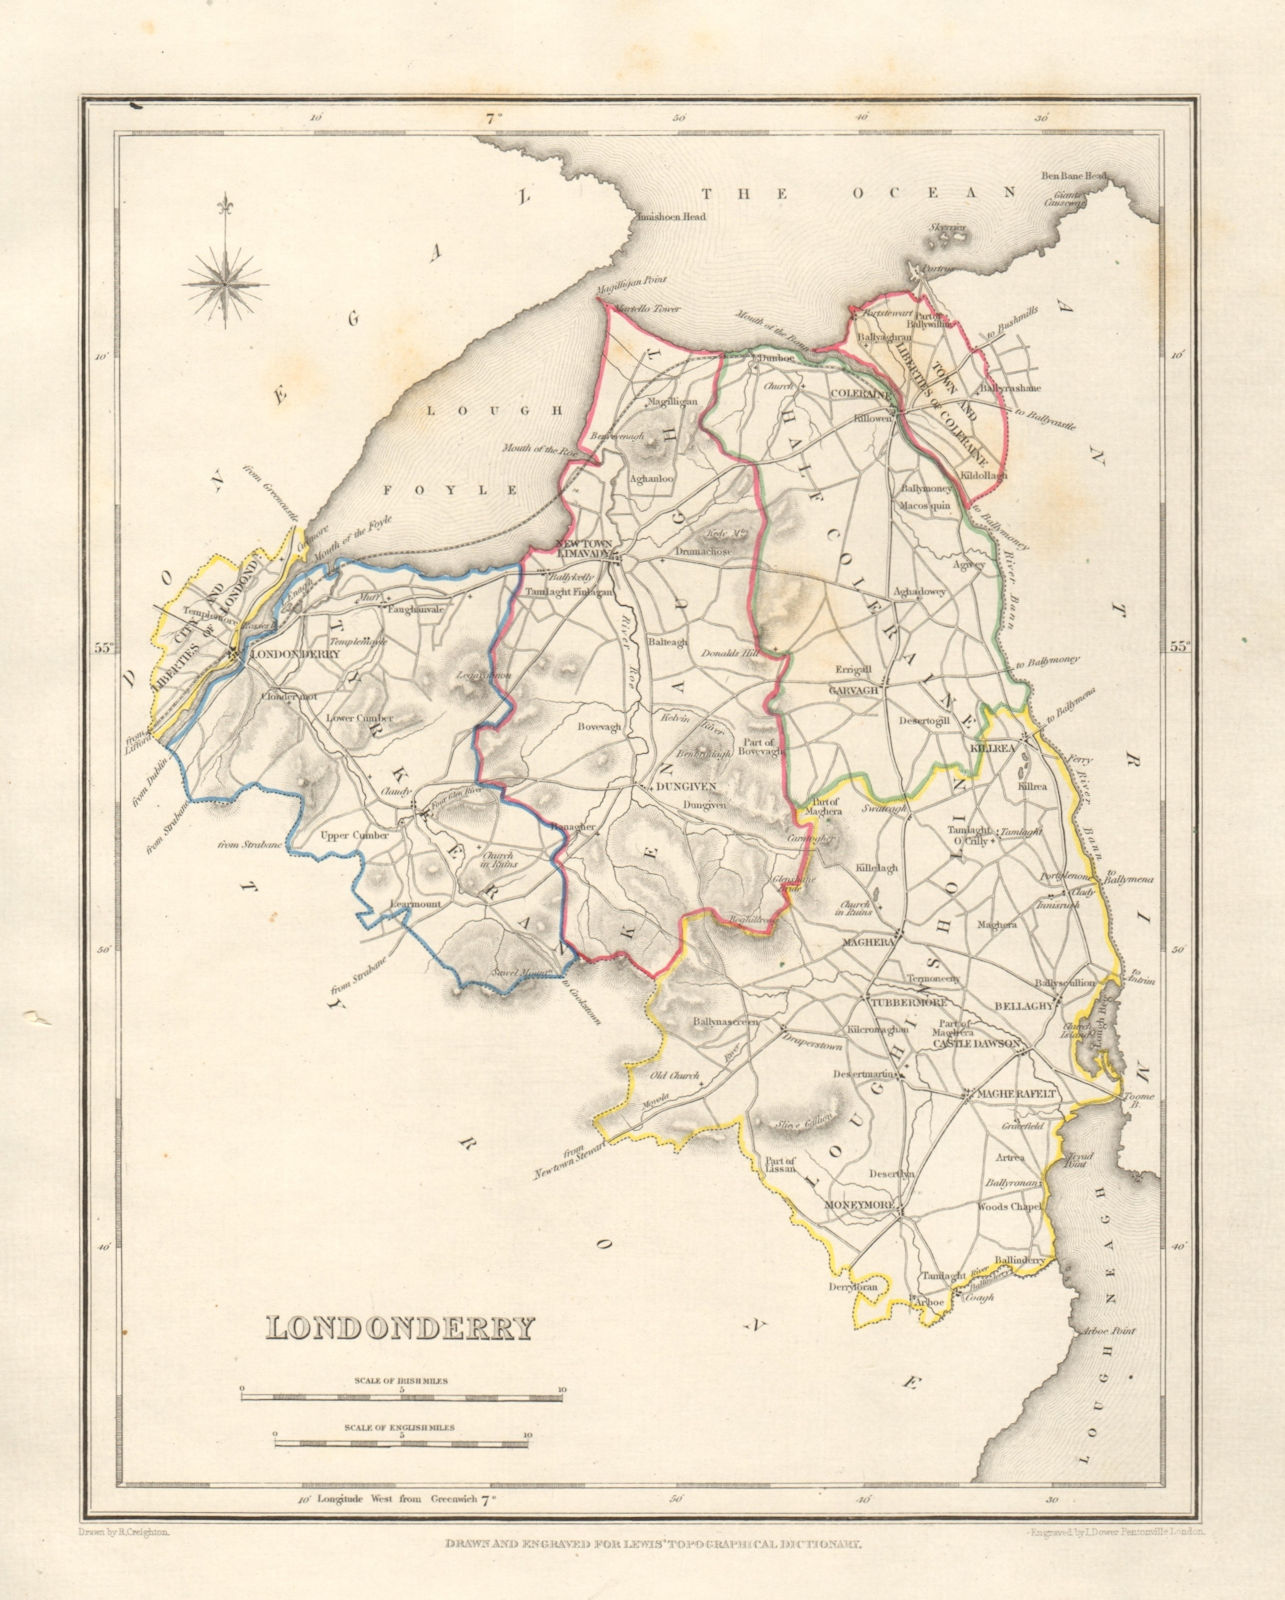 Associate Product COUNTY LONDONDERRY antique map for LEWIS by DOWER & CREIGHTON. Ulster 1846